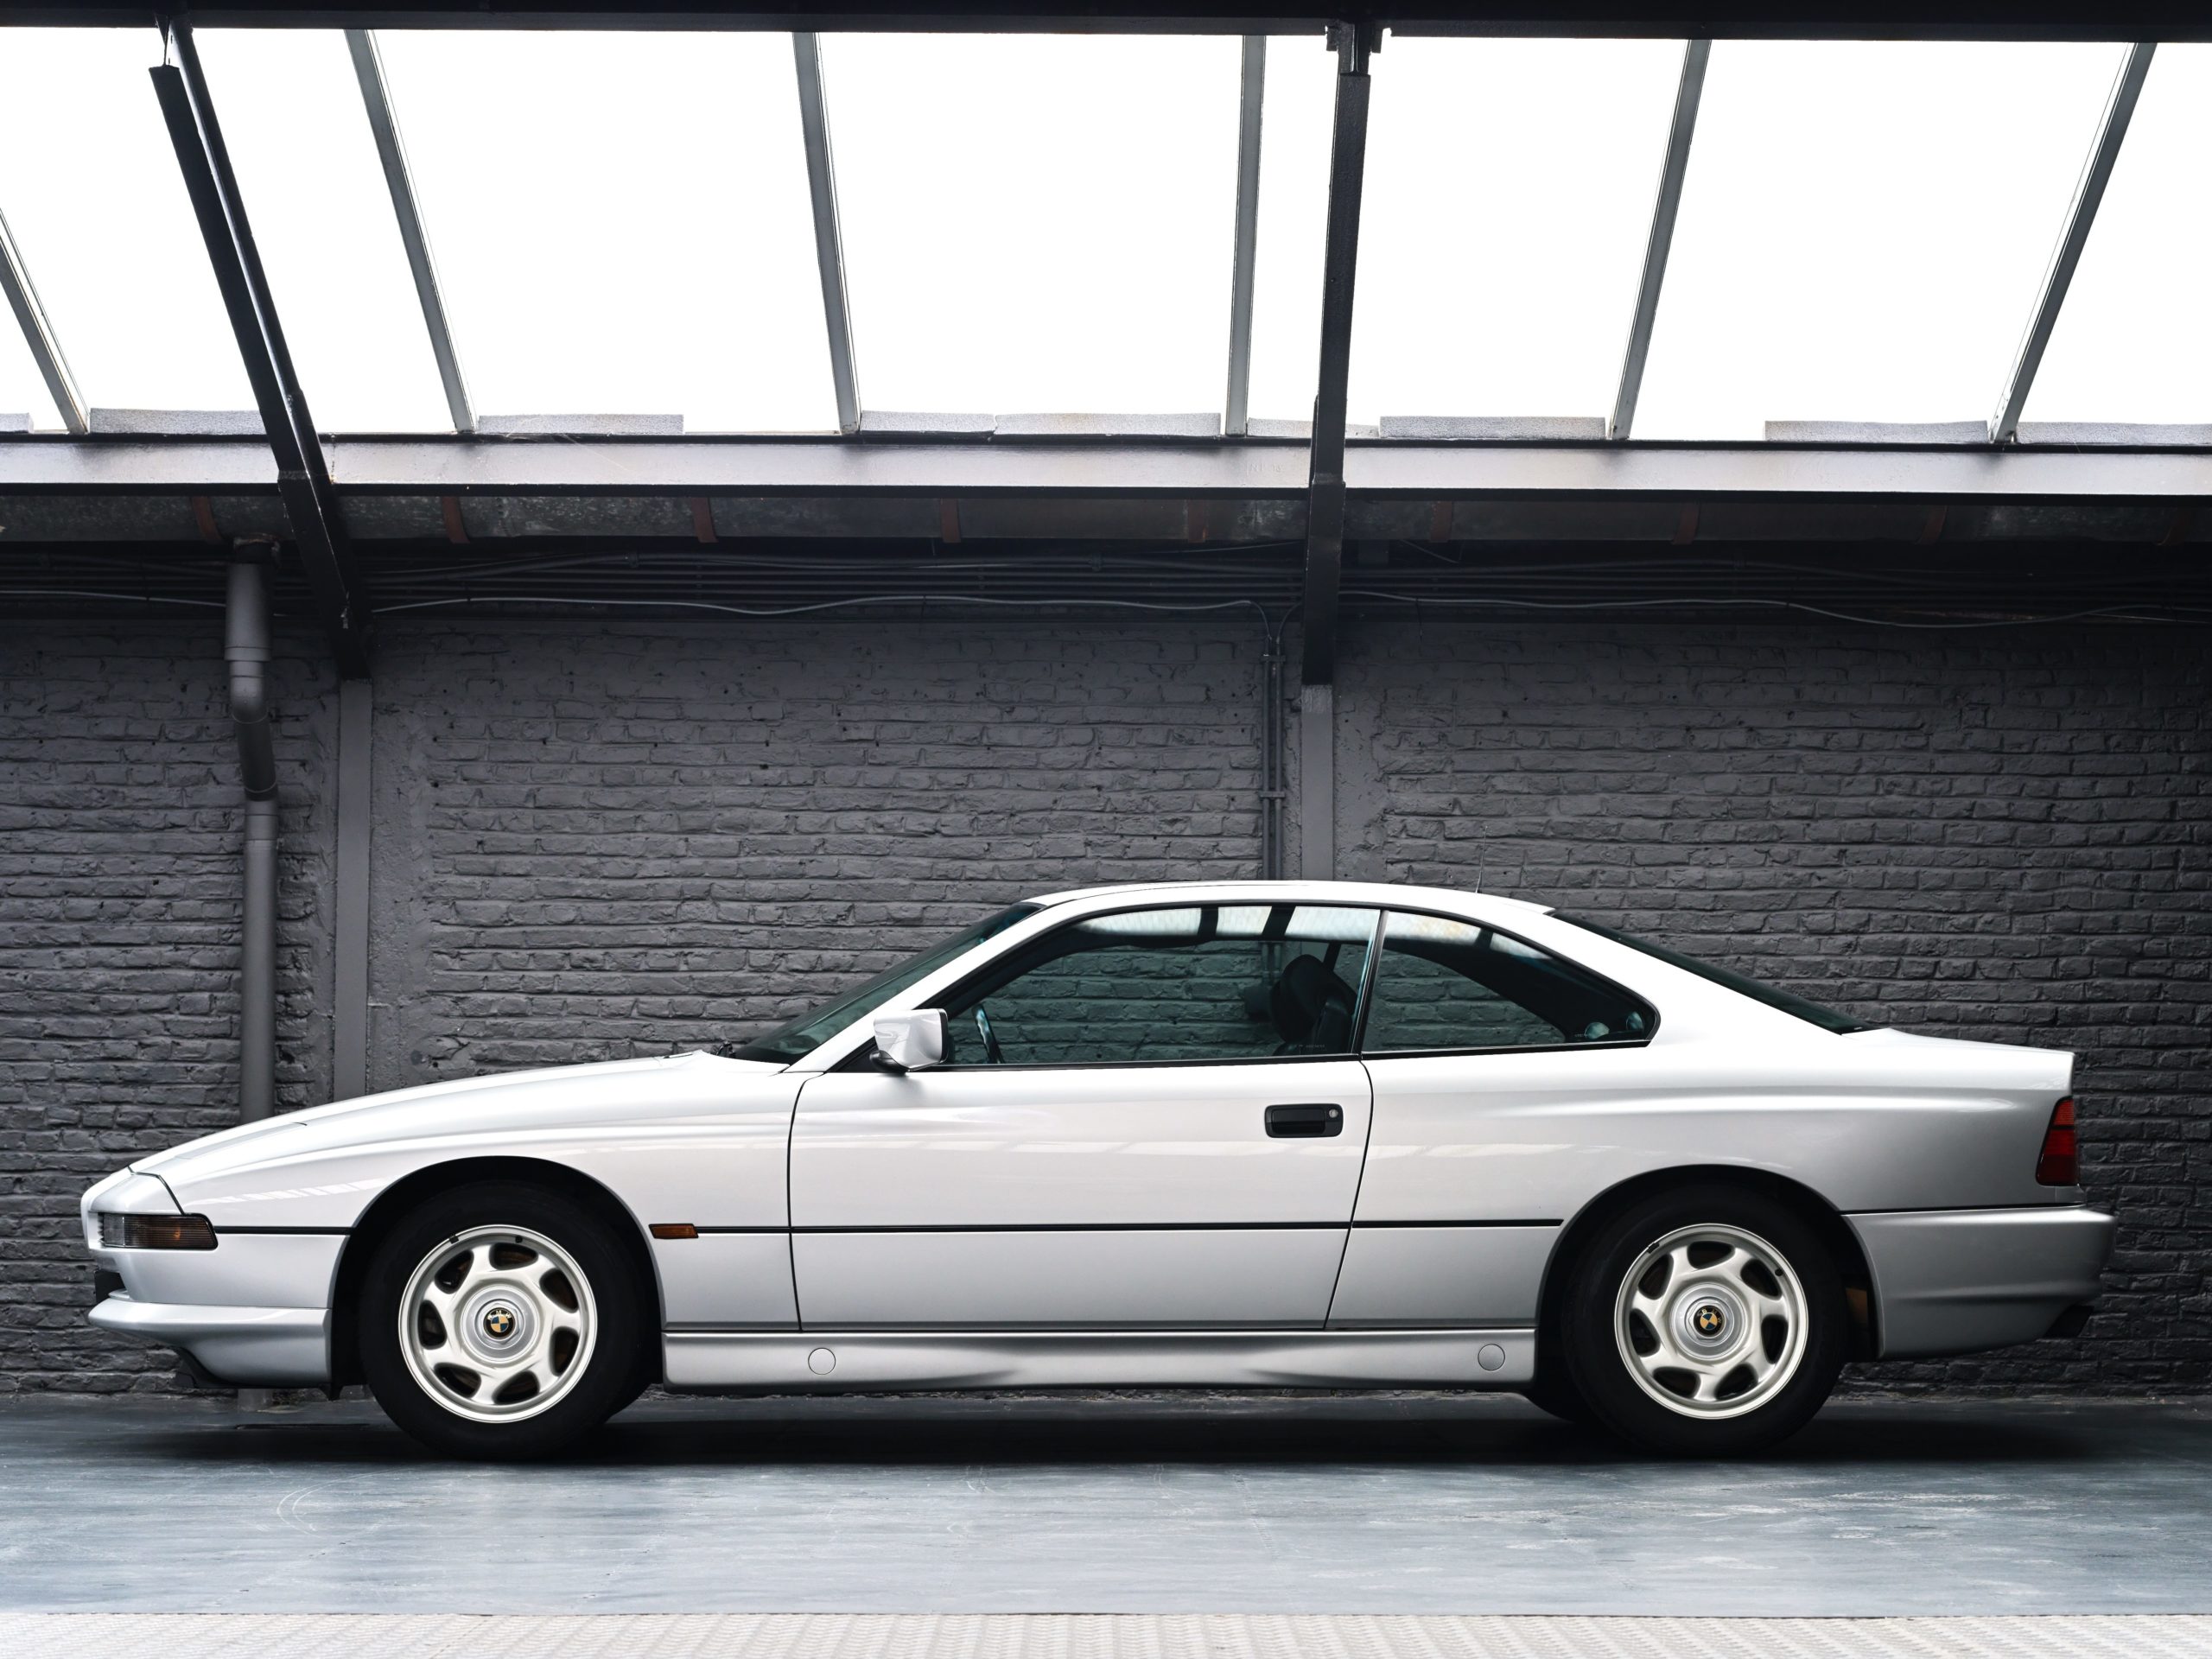 side view of a 1991 BMW 850i 6 speed manual for sale with Classic 42 Belgium